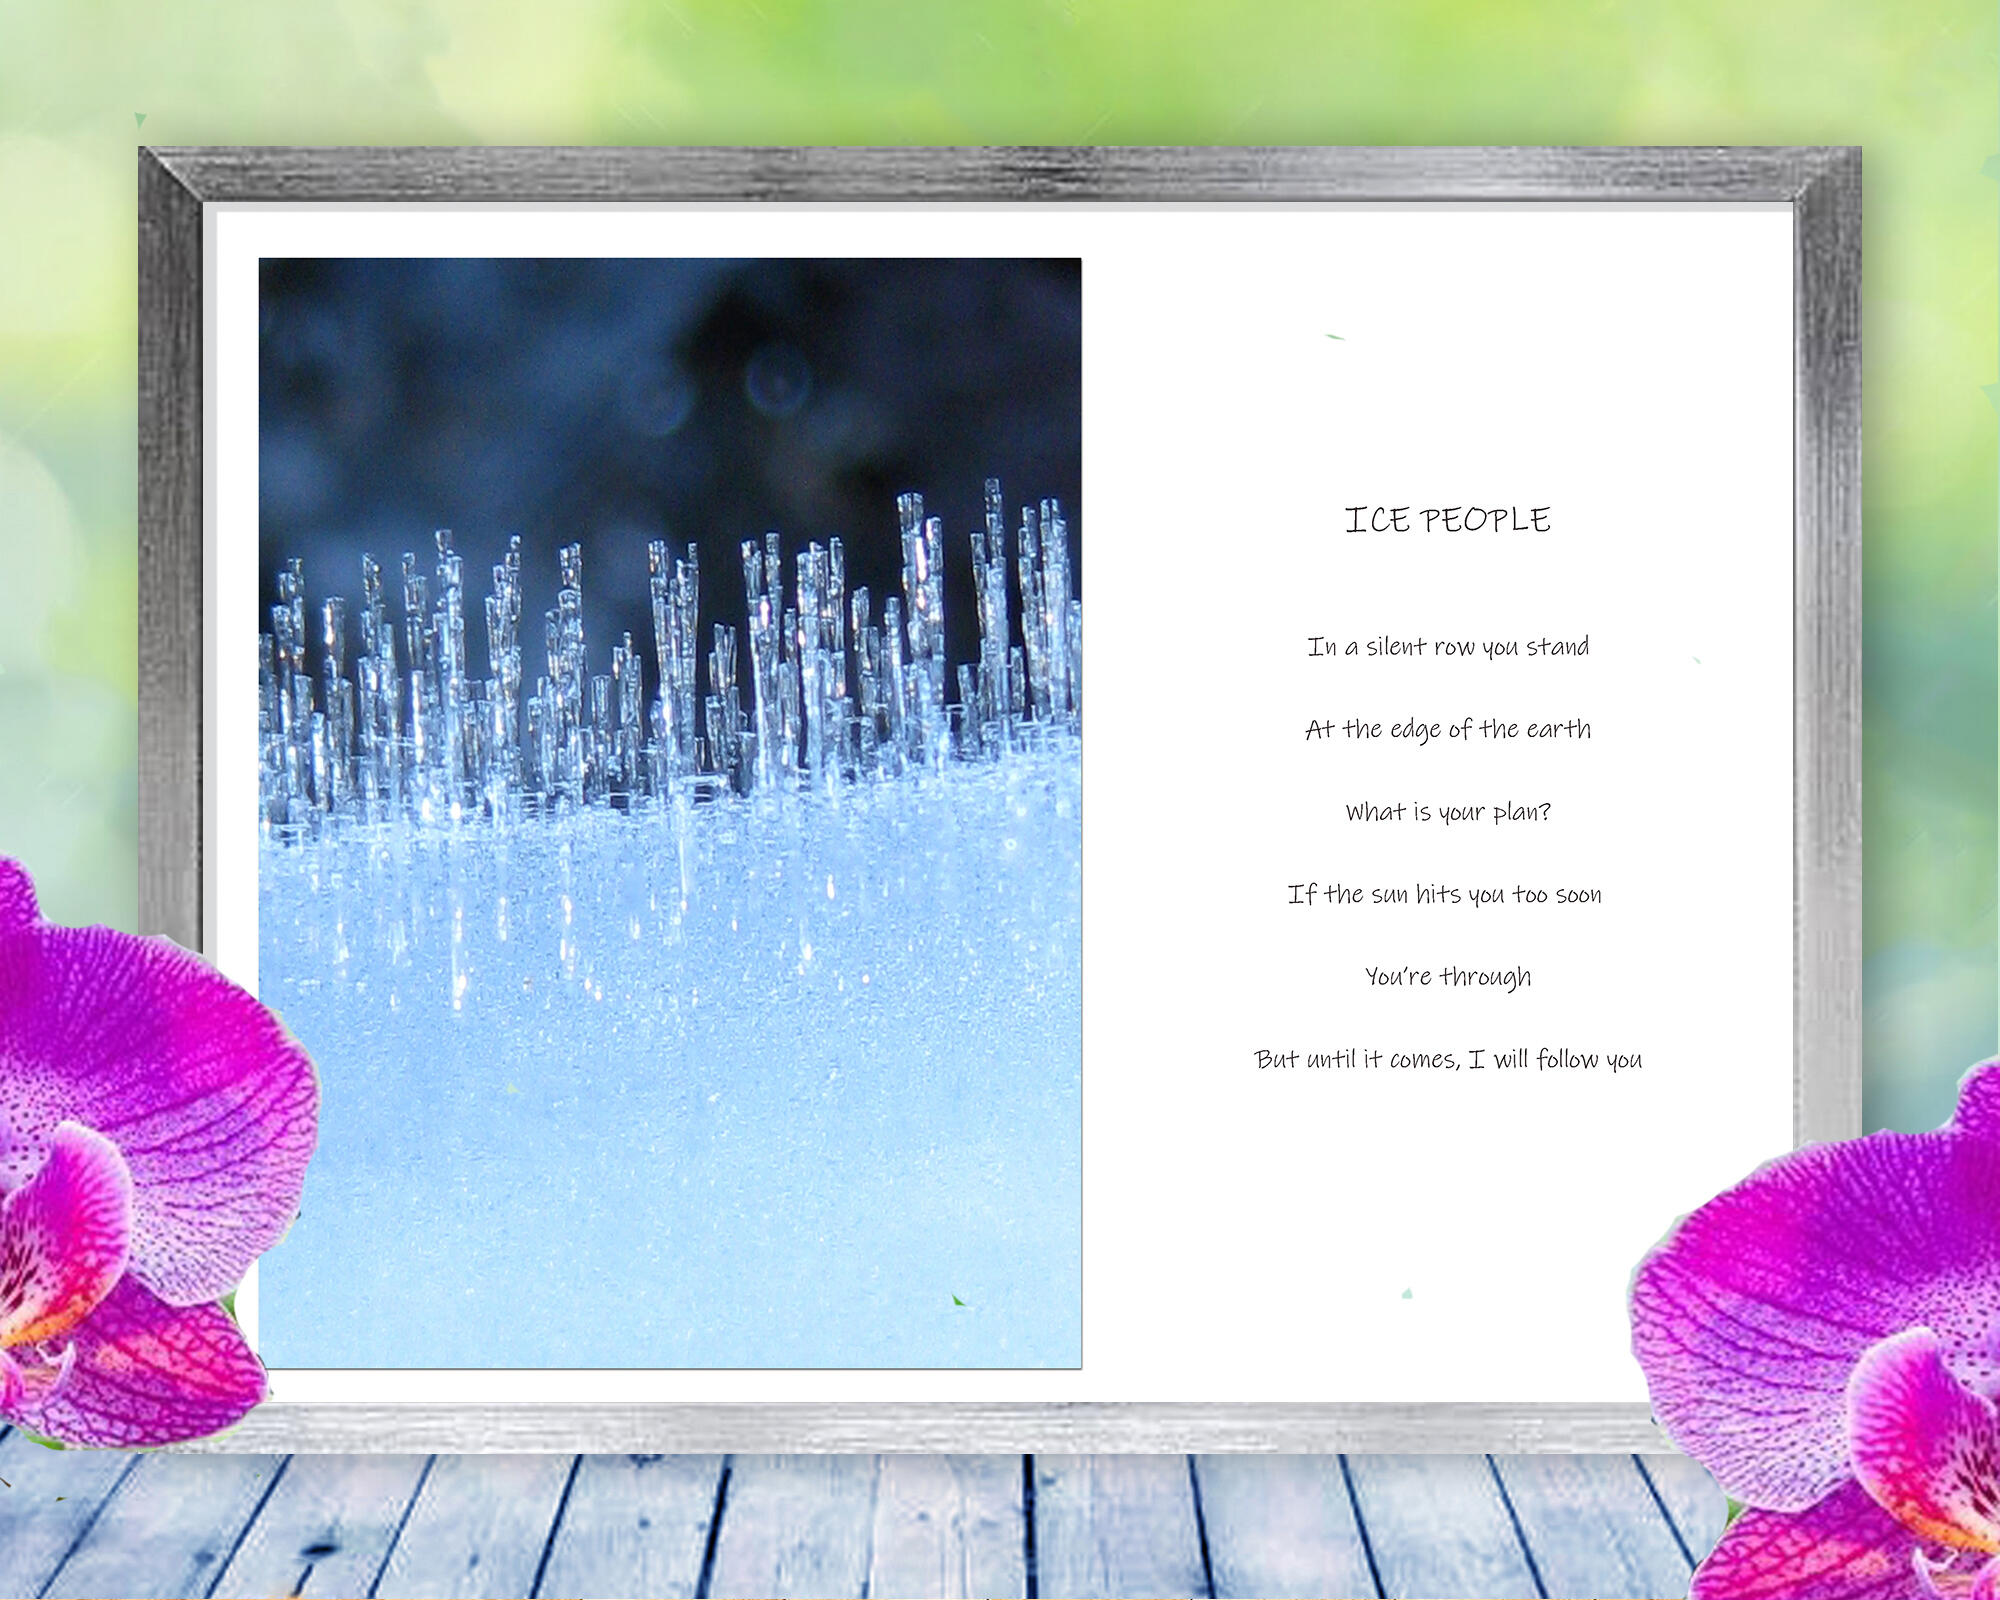 Crystals of ice greet the day in this imaginative, intriguing, Nature Spirit Story. Photo with Poem - Ice People by The Poetry of Nature